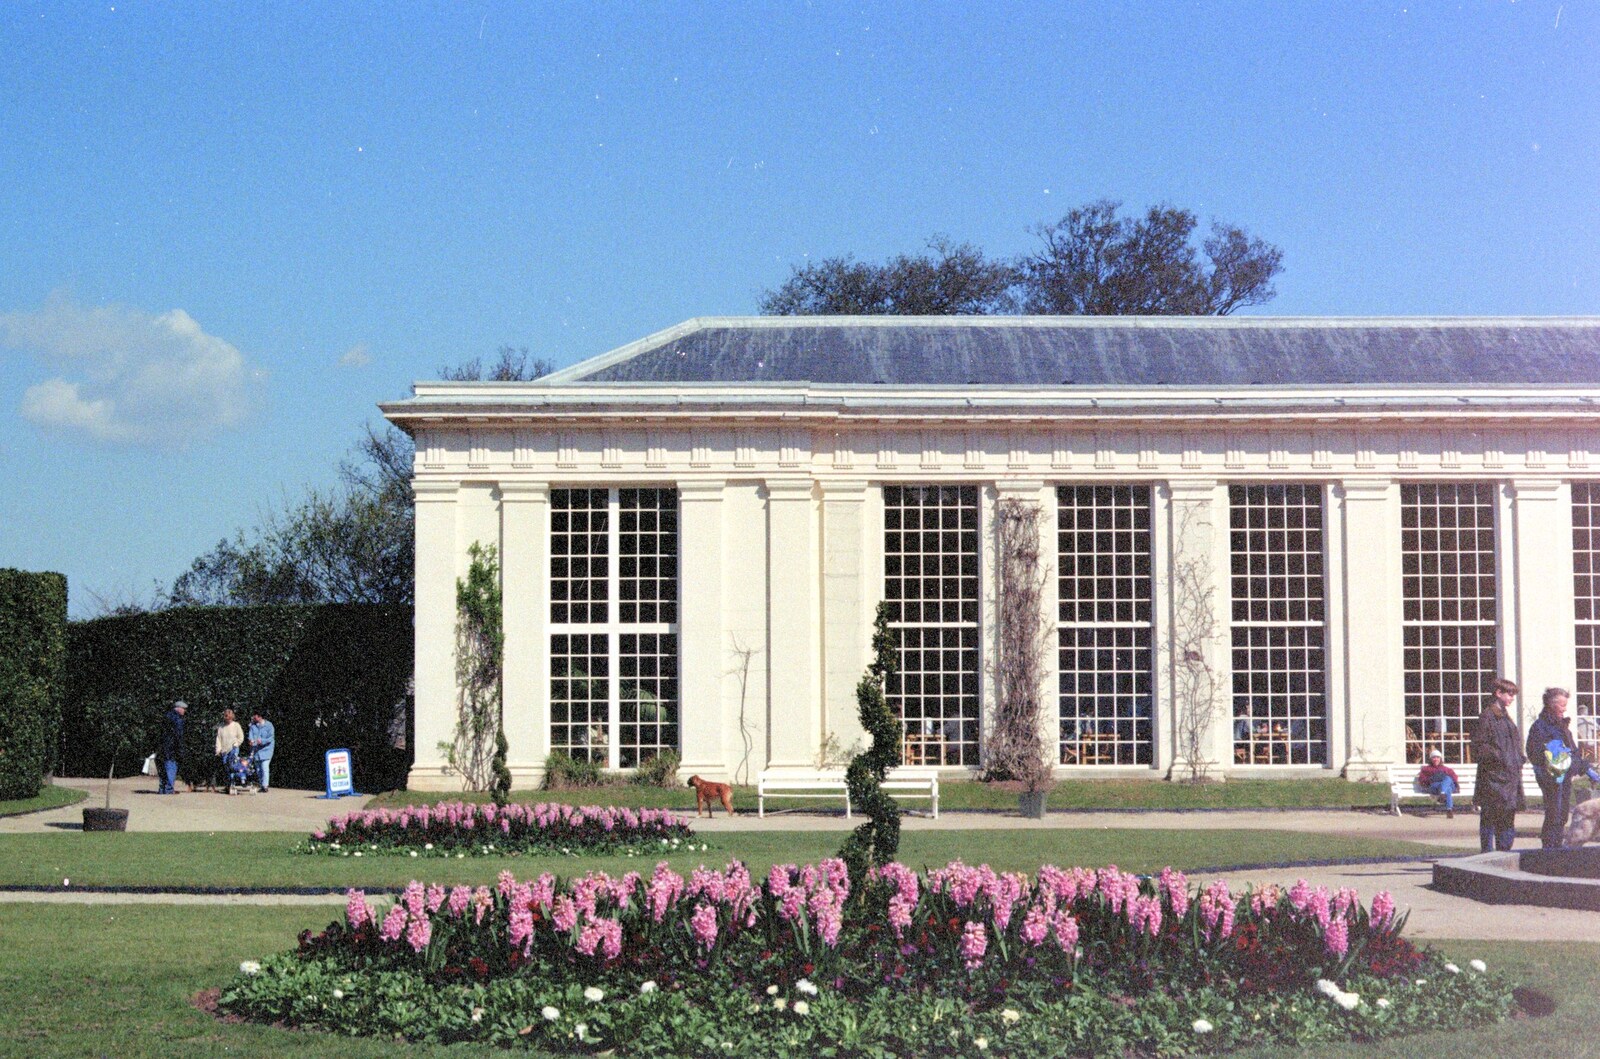 Pink lupins and the Orangery from Uni: A CISU Trip To Plymouth, Devon - 16th March 1996